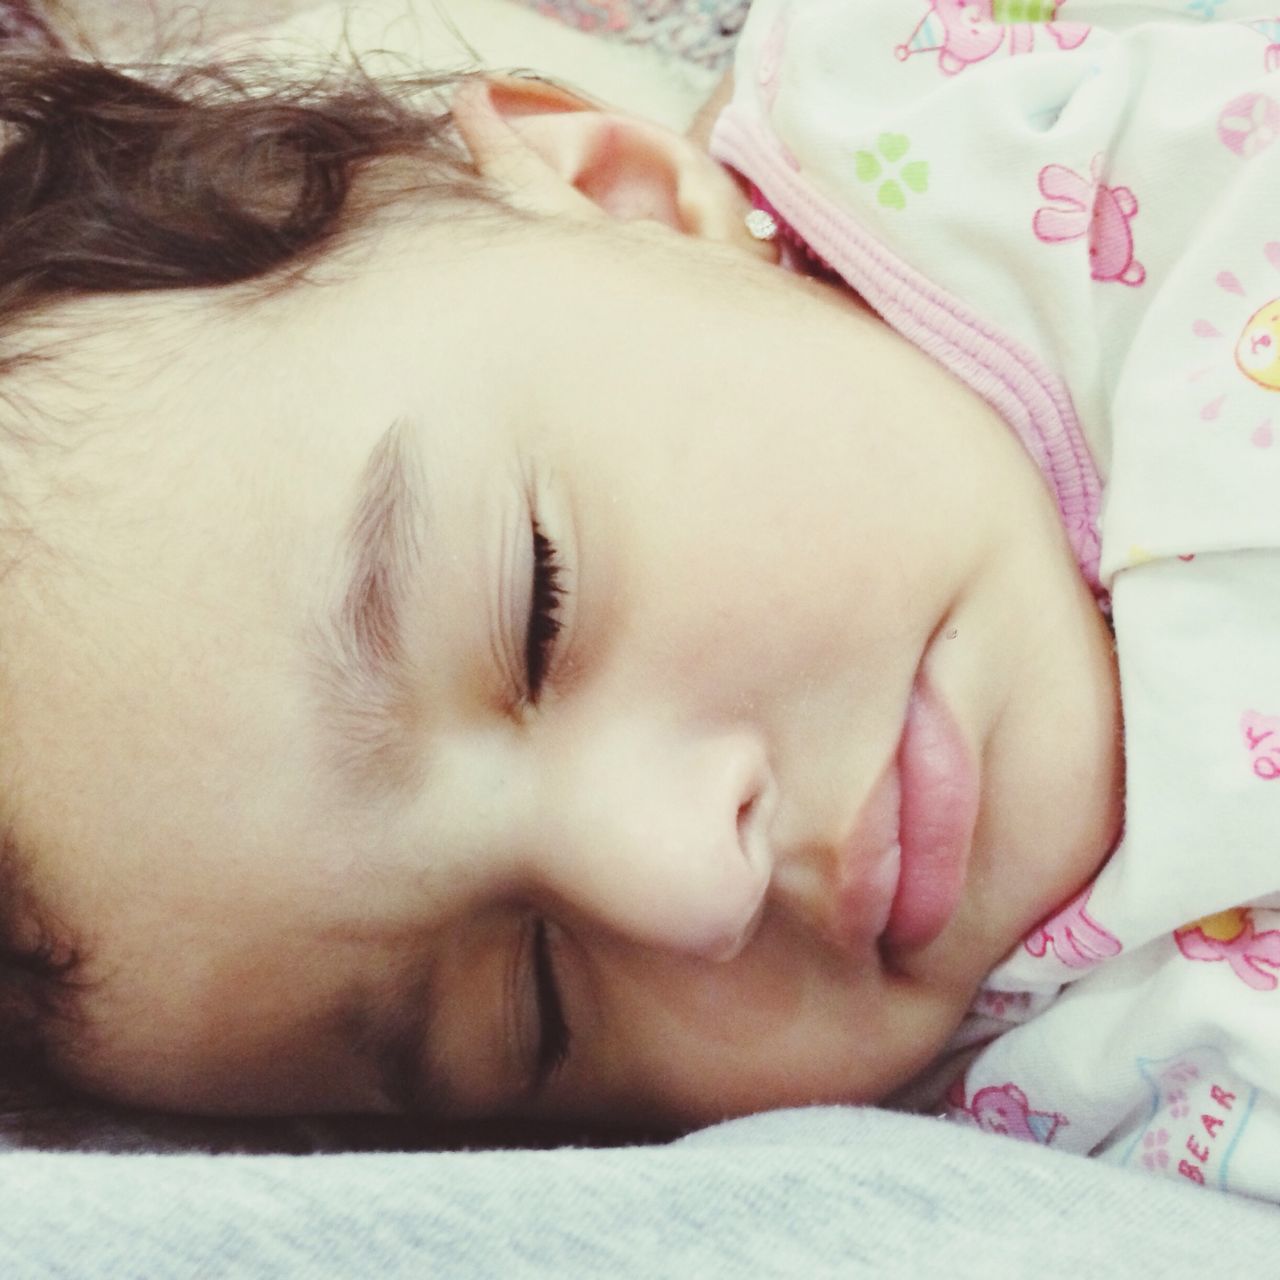 indoors, bed, sleeping, innocence, baby, childhood, relaxation, babyhood, lying down, cute, person, toddler, eyes closed, close-up, resting, home interior, headshot, blanket